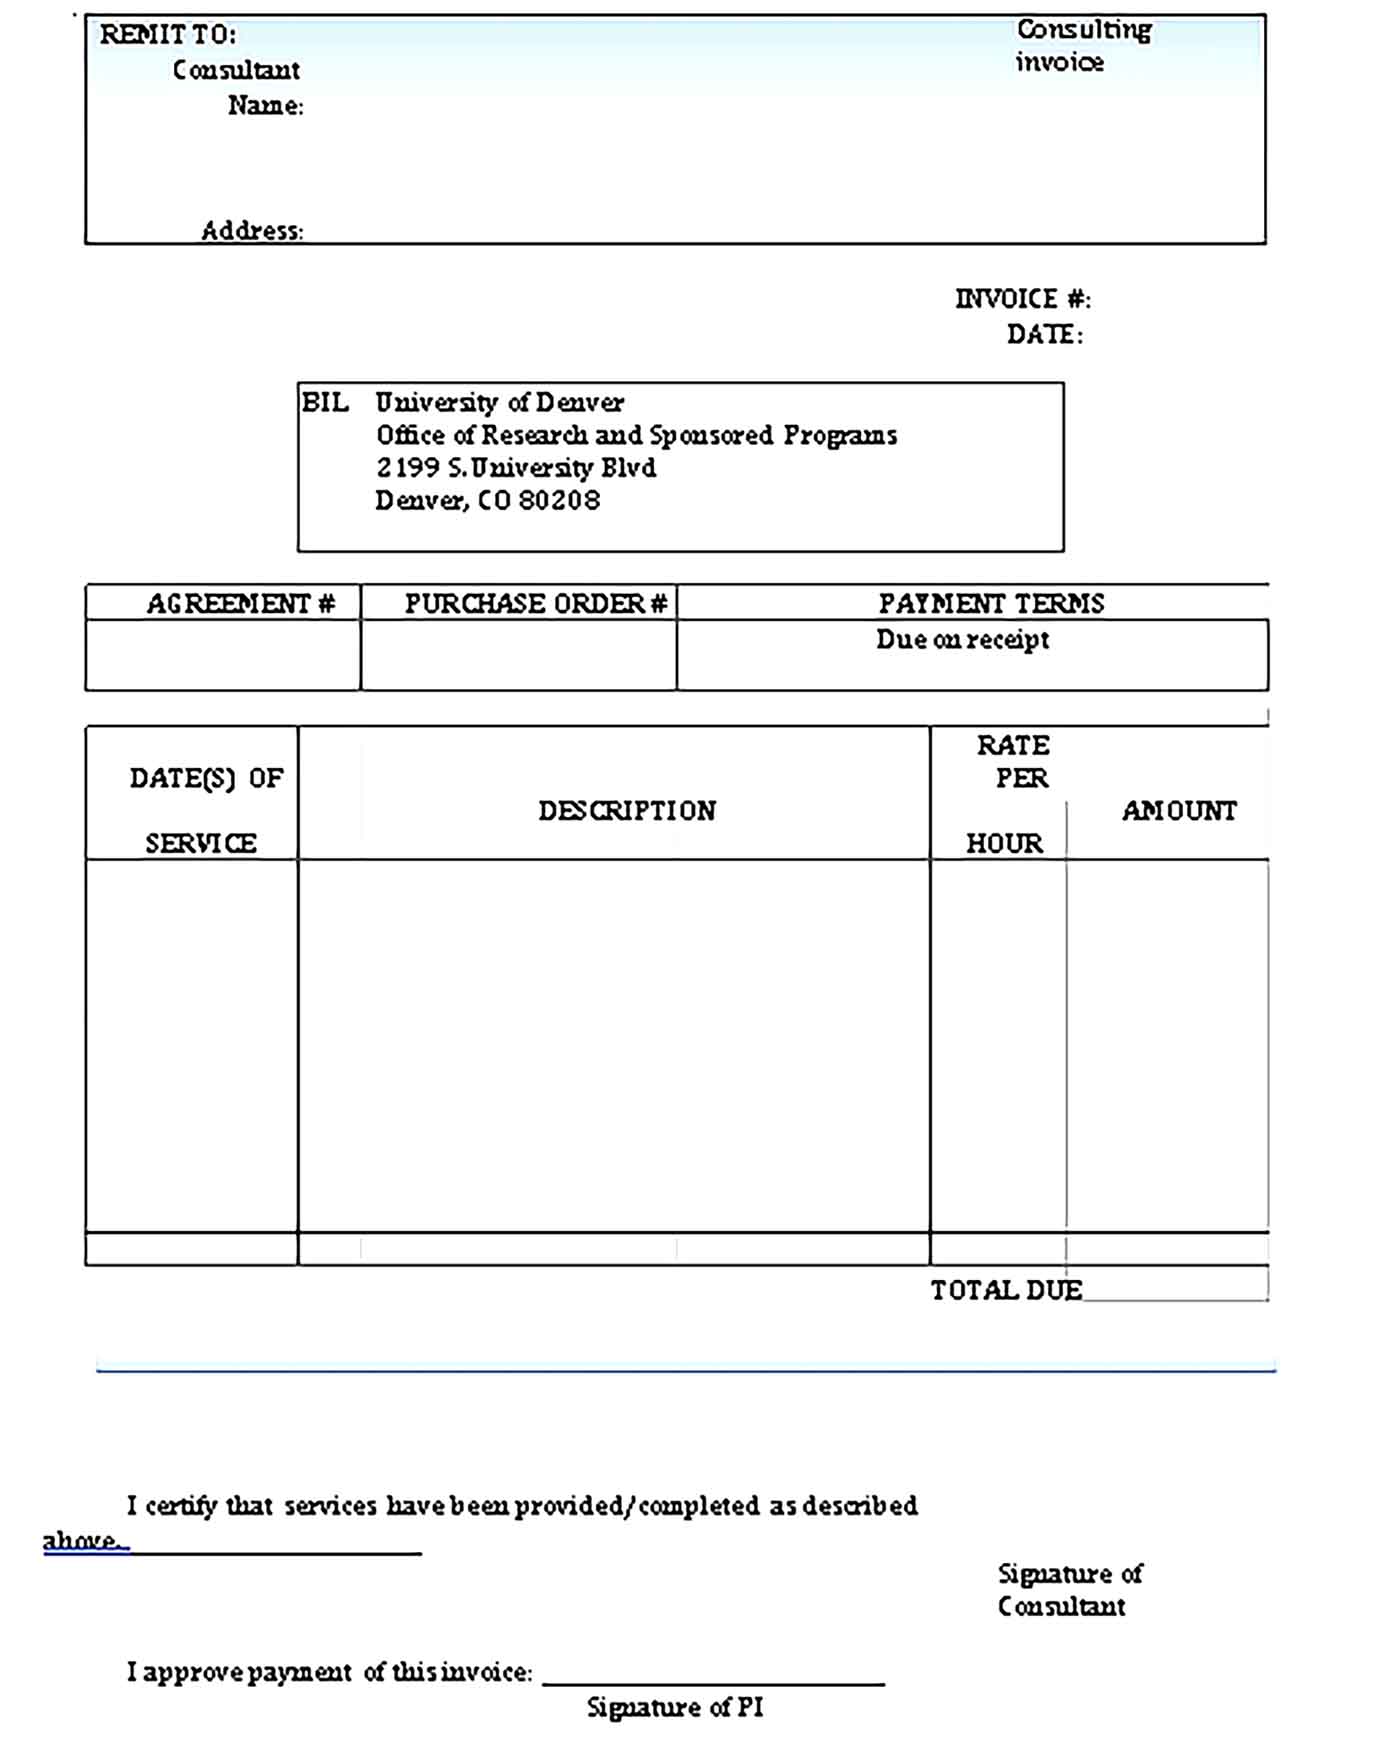 Sample Templates consulting invoice Free